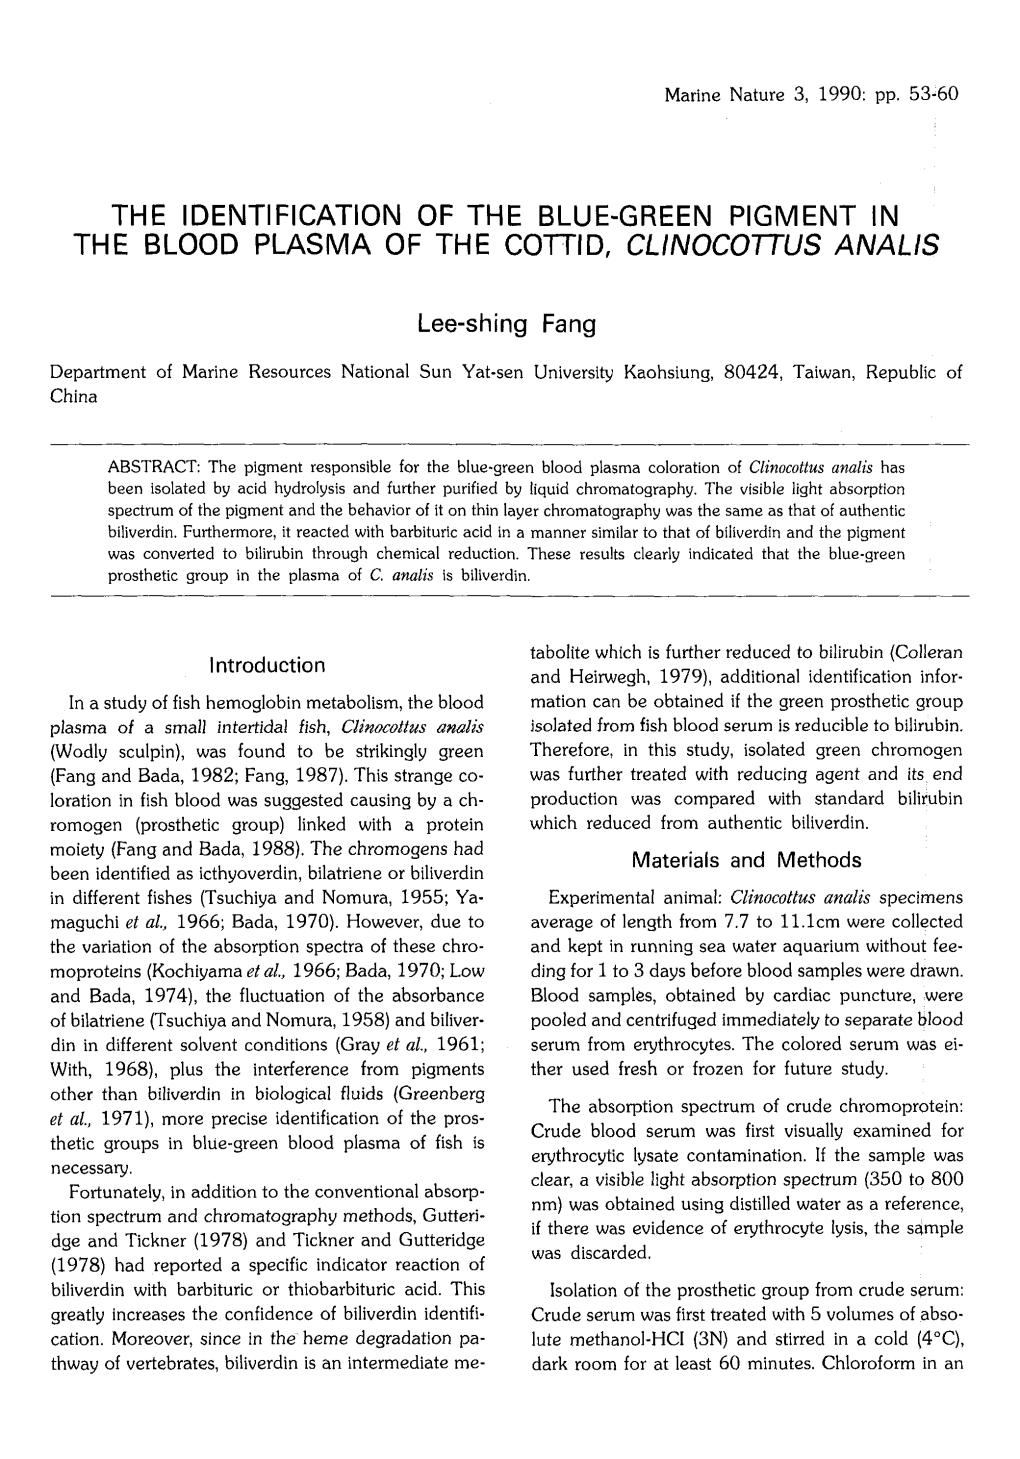 THE IDENTIFICATION of the BLUE-GREEN PIGMENT in the BLOOD PLASMA of the COTTID, CLINOCOTTUS ANALIS Lee-Shing Fang